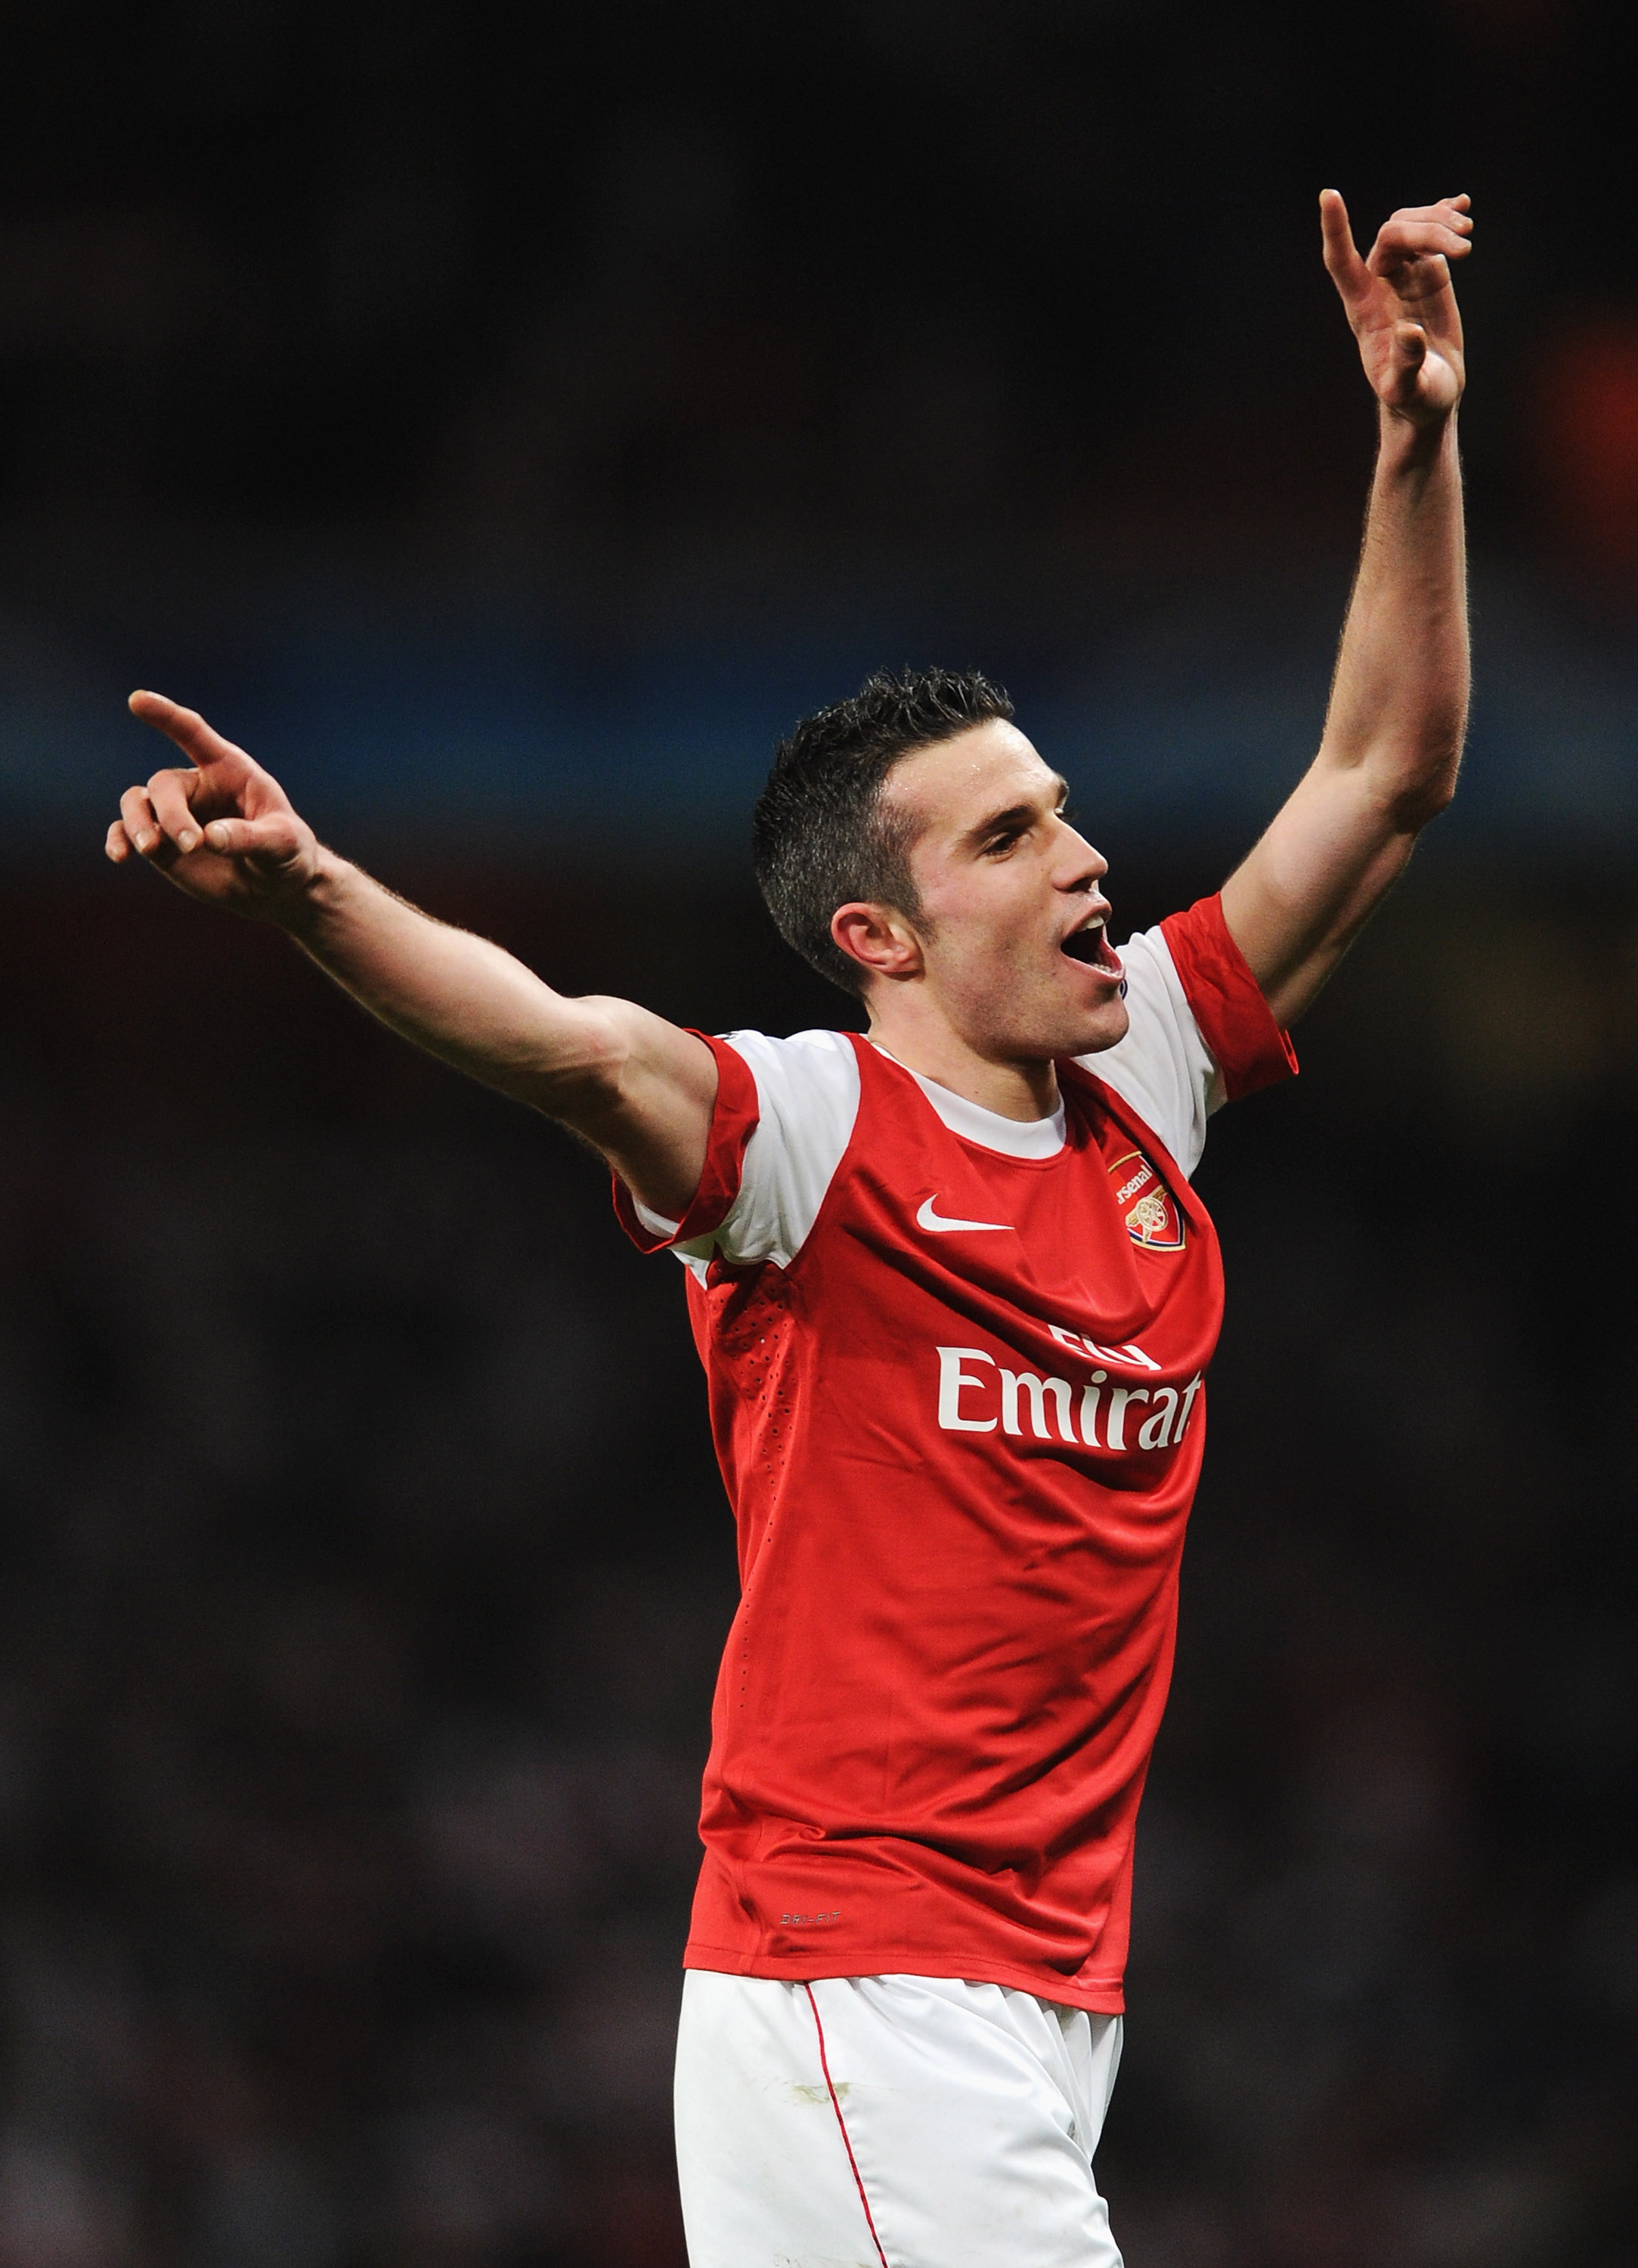 LONDON, ENGLAND - FEBRUARY 16:  Robin van Persie of Arsenal celebrates victory after the UEFA Champions League round of 16 first leg match between Arsenal and Barcelona at the Emirates Stadium on February 16, 2011 in London, England.  (Photo by Jasper Jui